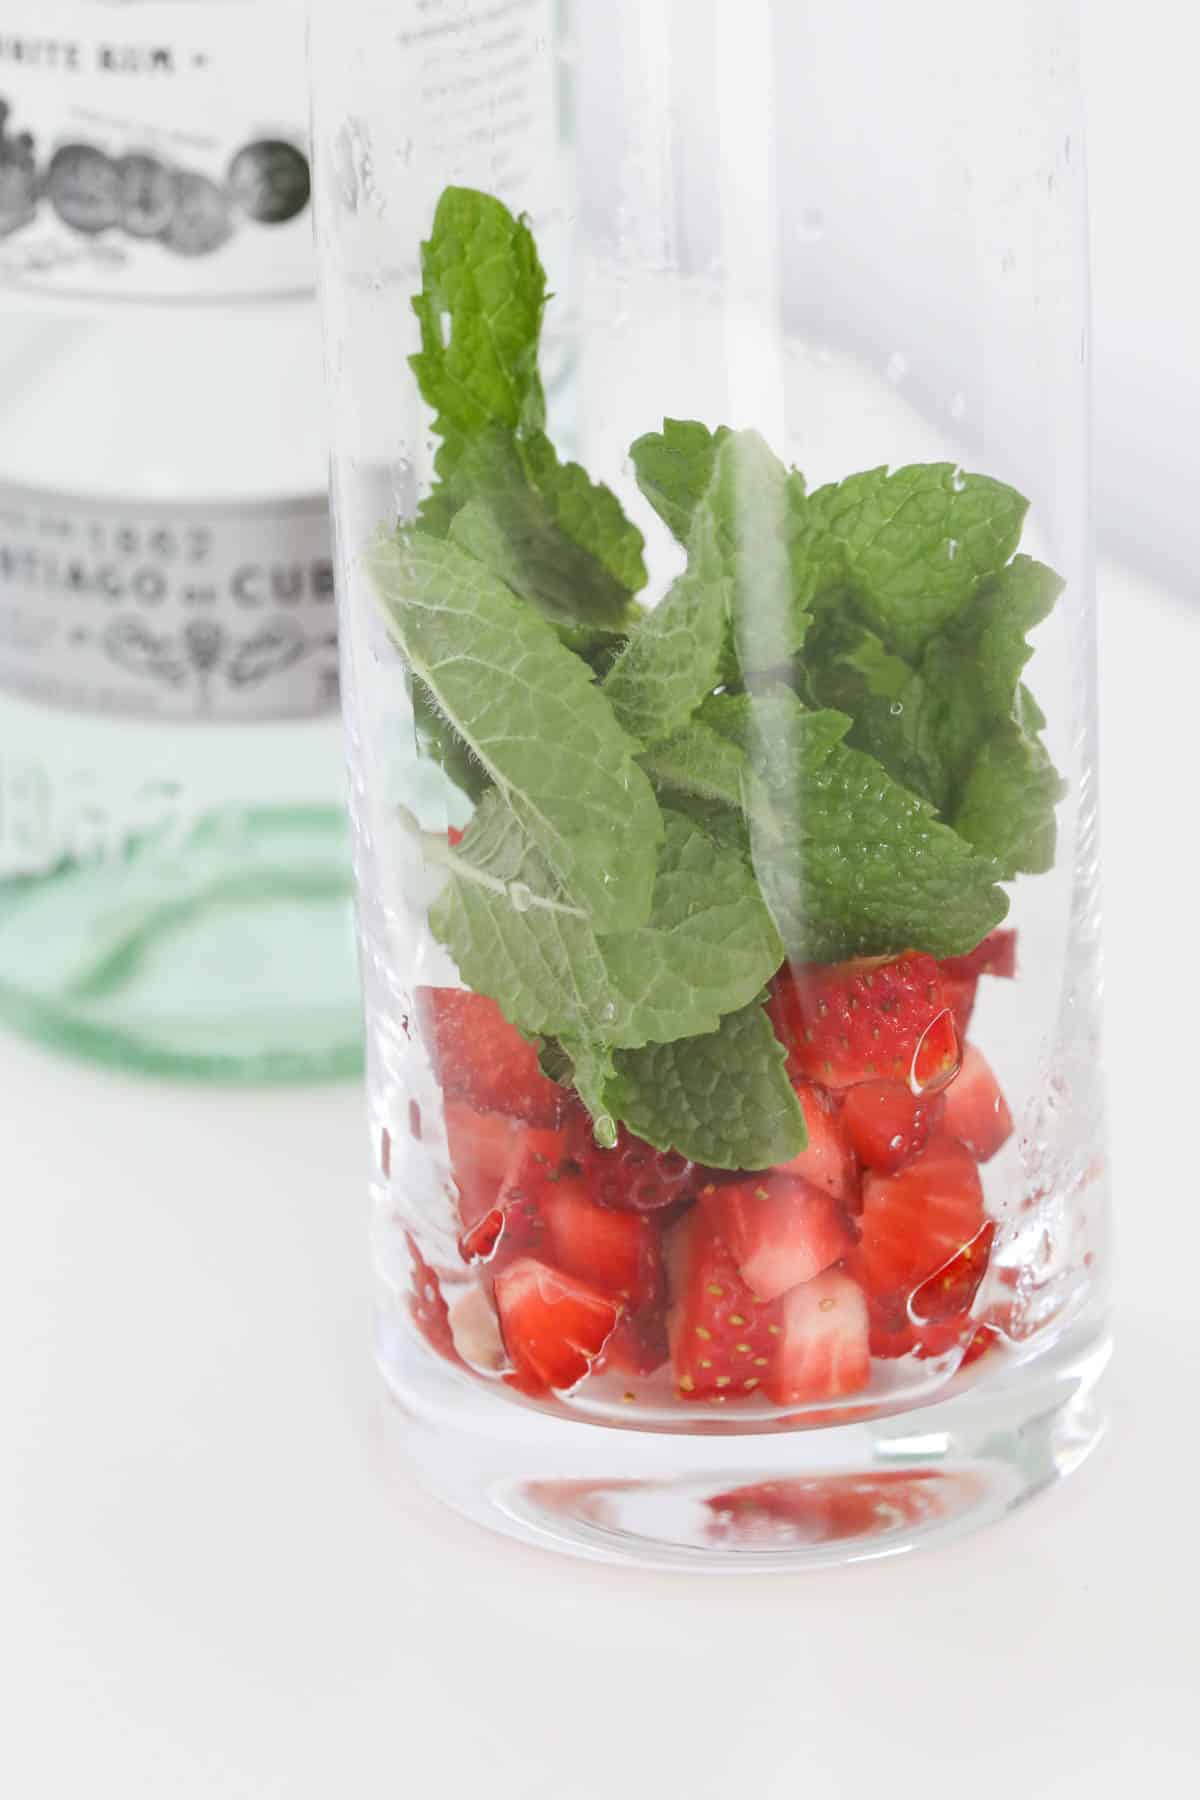 Diced strawberries and mint leaves added to a glass.